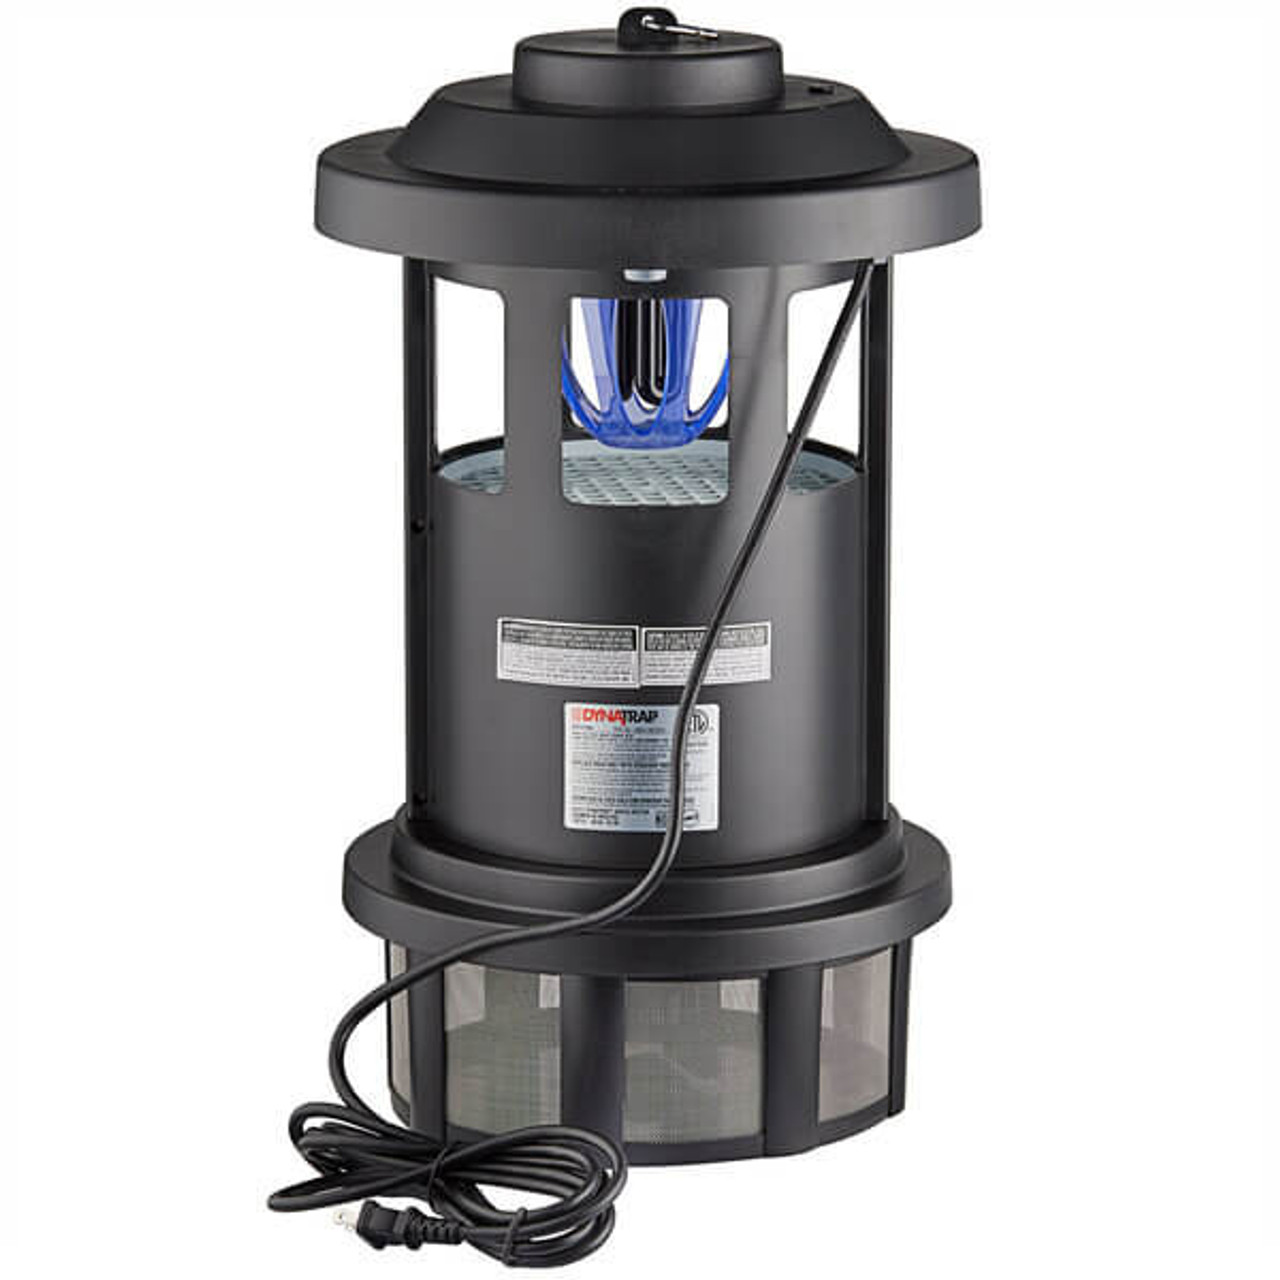 Dynatrap DT1750 Indoor/Outdoor Black Flying Insect Trap with AtraktaGlo Light - 14 Watts - 3/4 Acre Coverage